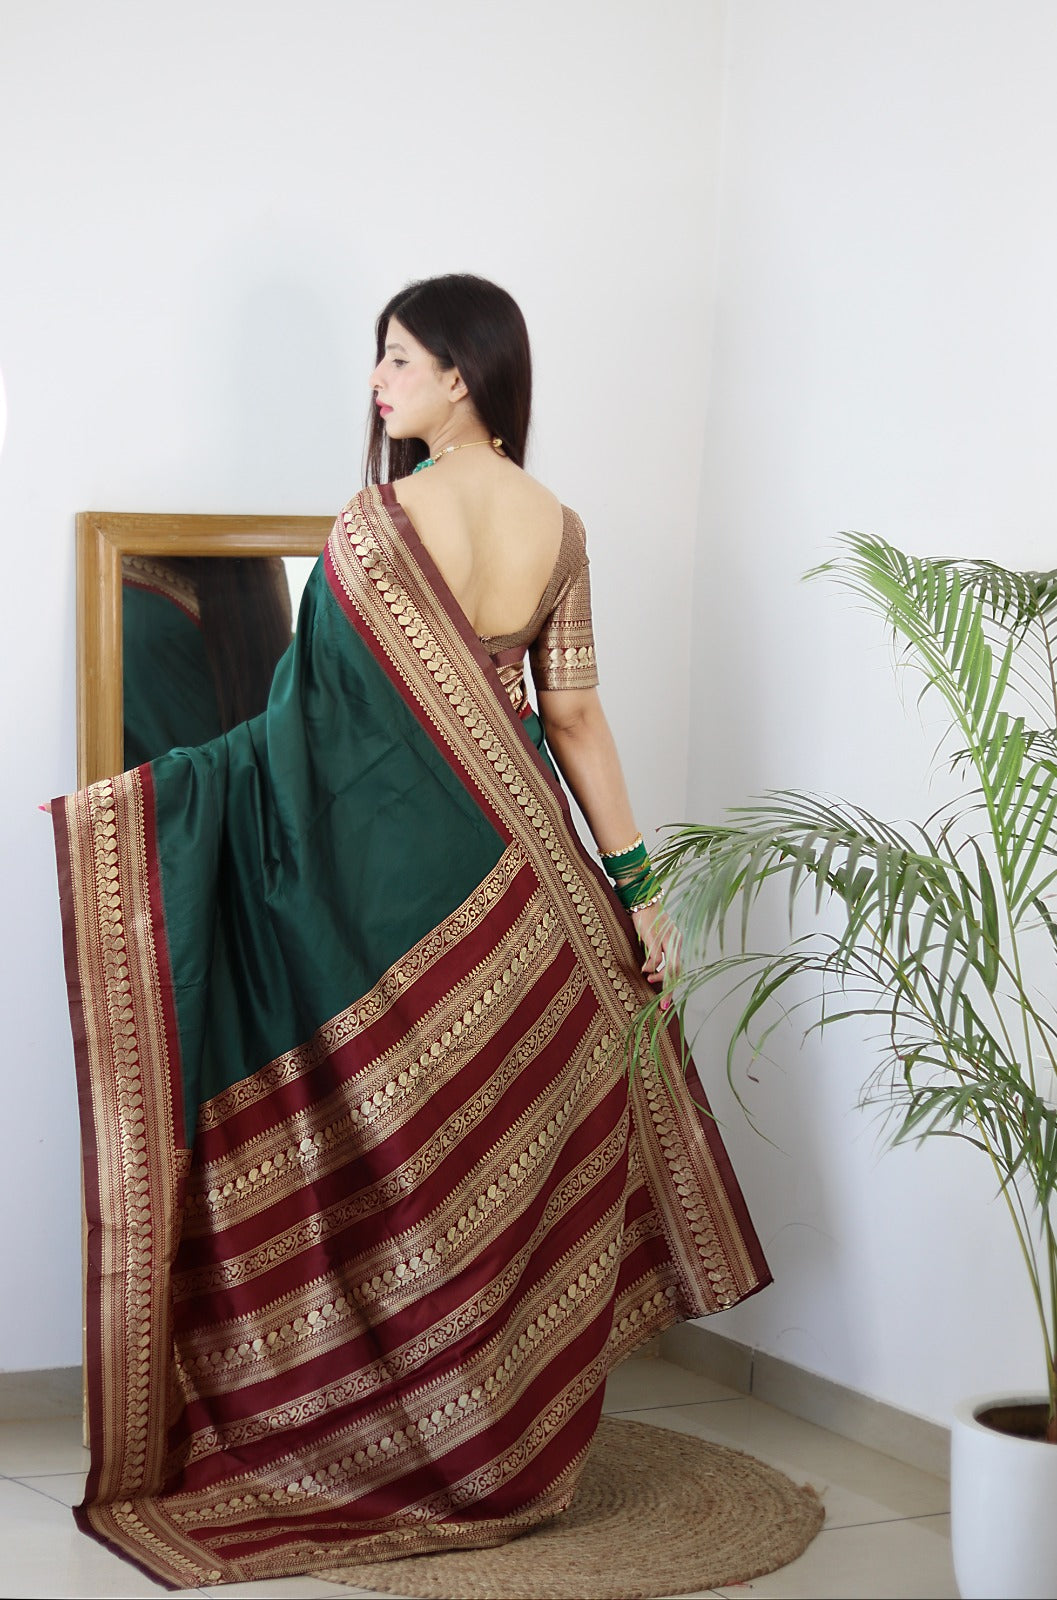 Buy Cascading Elegance: Unveiling Opulence with the Majestic Reach Pallu in  Banarasi Soft Silk Sarees (Wine-Geren) at Amazon.in